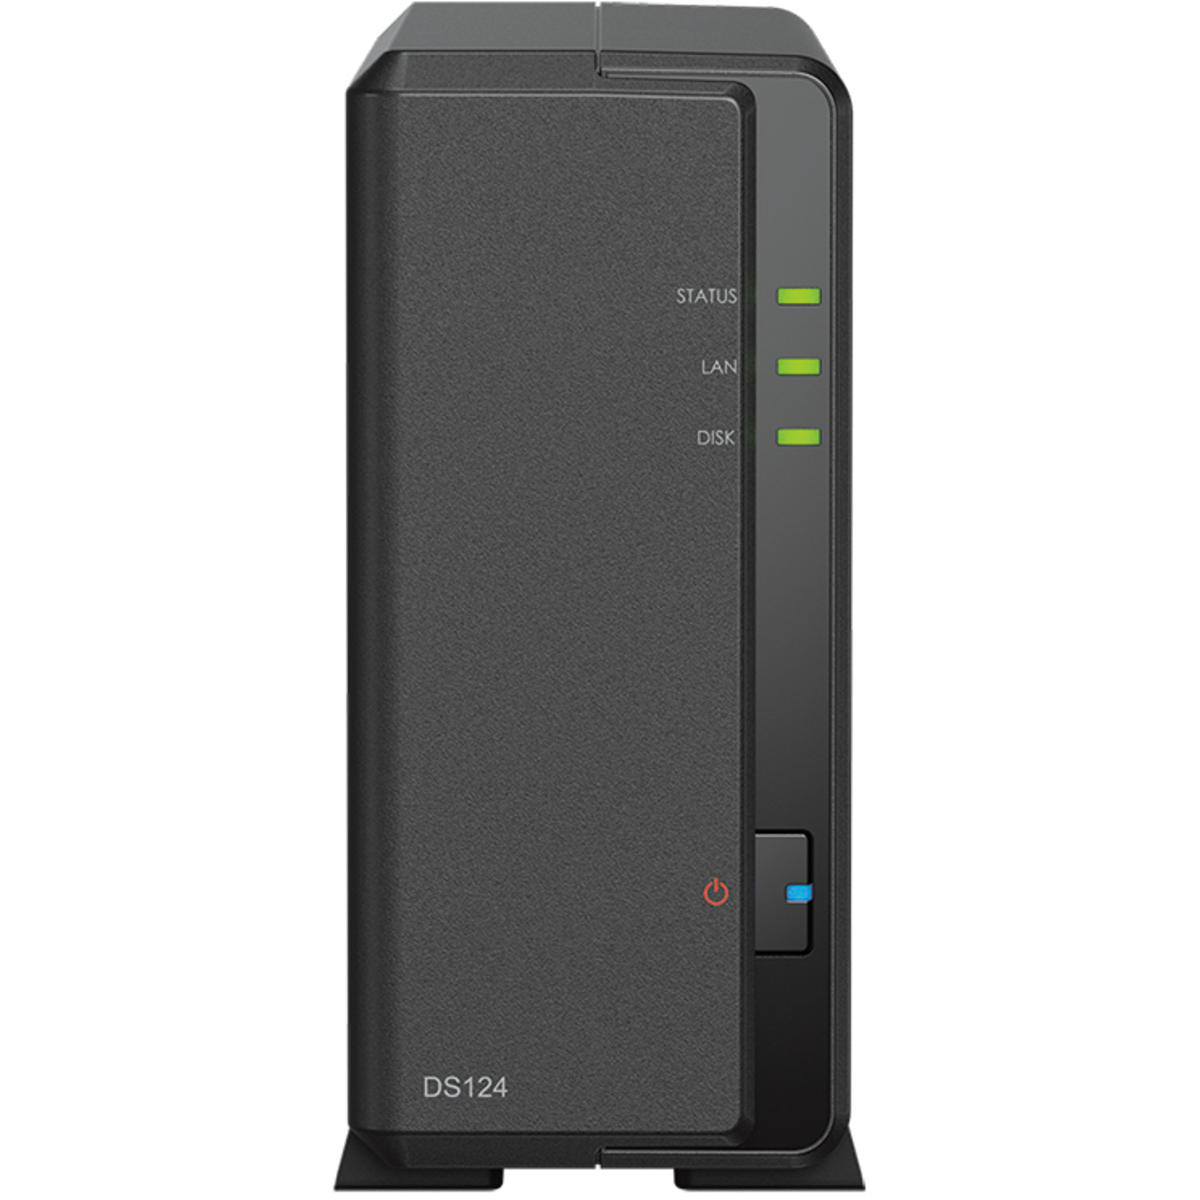 buy $514 Synology DiskStation DS124 8tb Desktop NAS - Network Attached Storage Device 1x8000gb Western Digital Gold WD8004FRYZ 3.5 7200rpm SATA 6Gb/s HDD ENTERPRISE Class Drives Installed - Burn-In Tested - nas headquarters buy network attached storage server device das new raid-5 free shipping simply usa DiskStation DS124